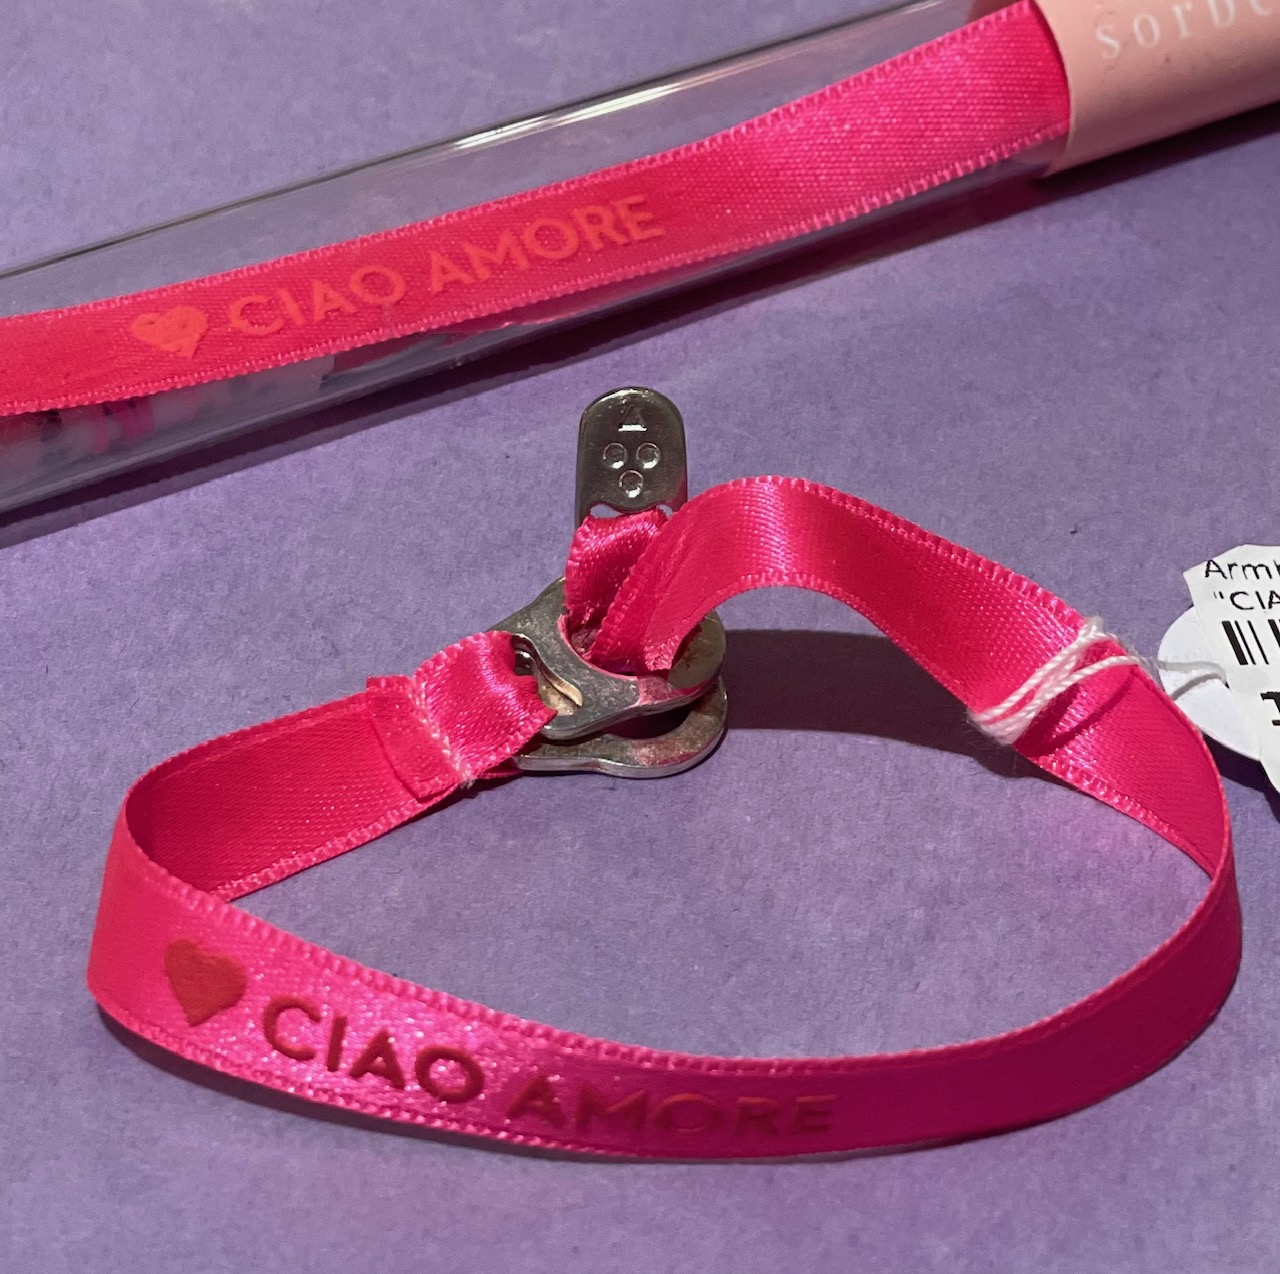 Armband Satin Bracelet "CIAO AMORE" Neon Pink, verpackt im Reagenzglas